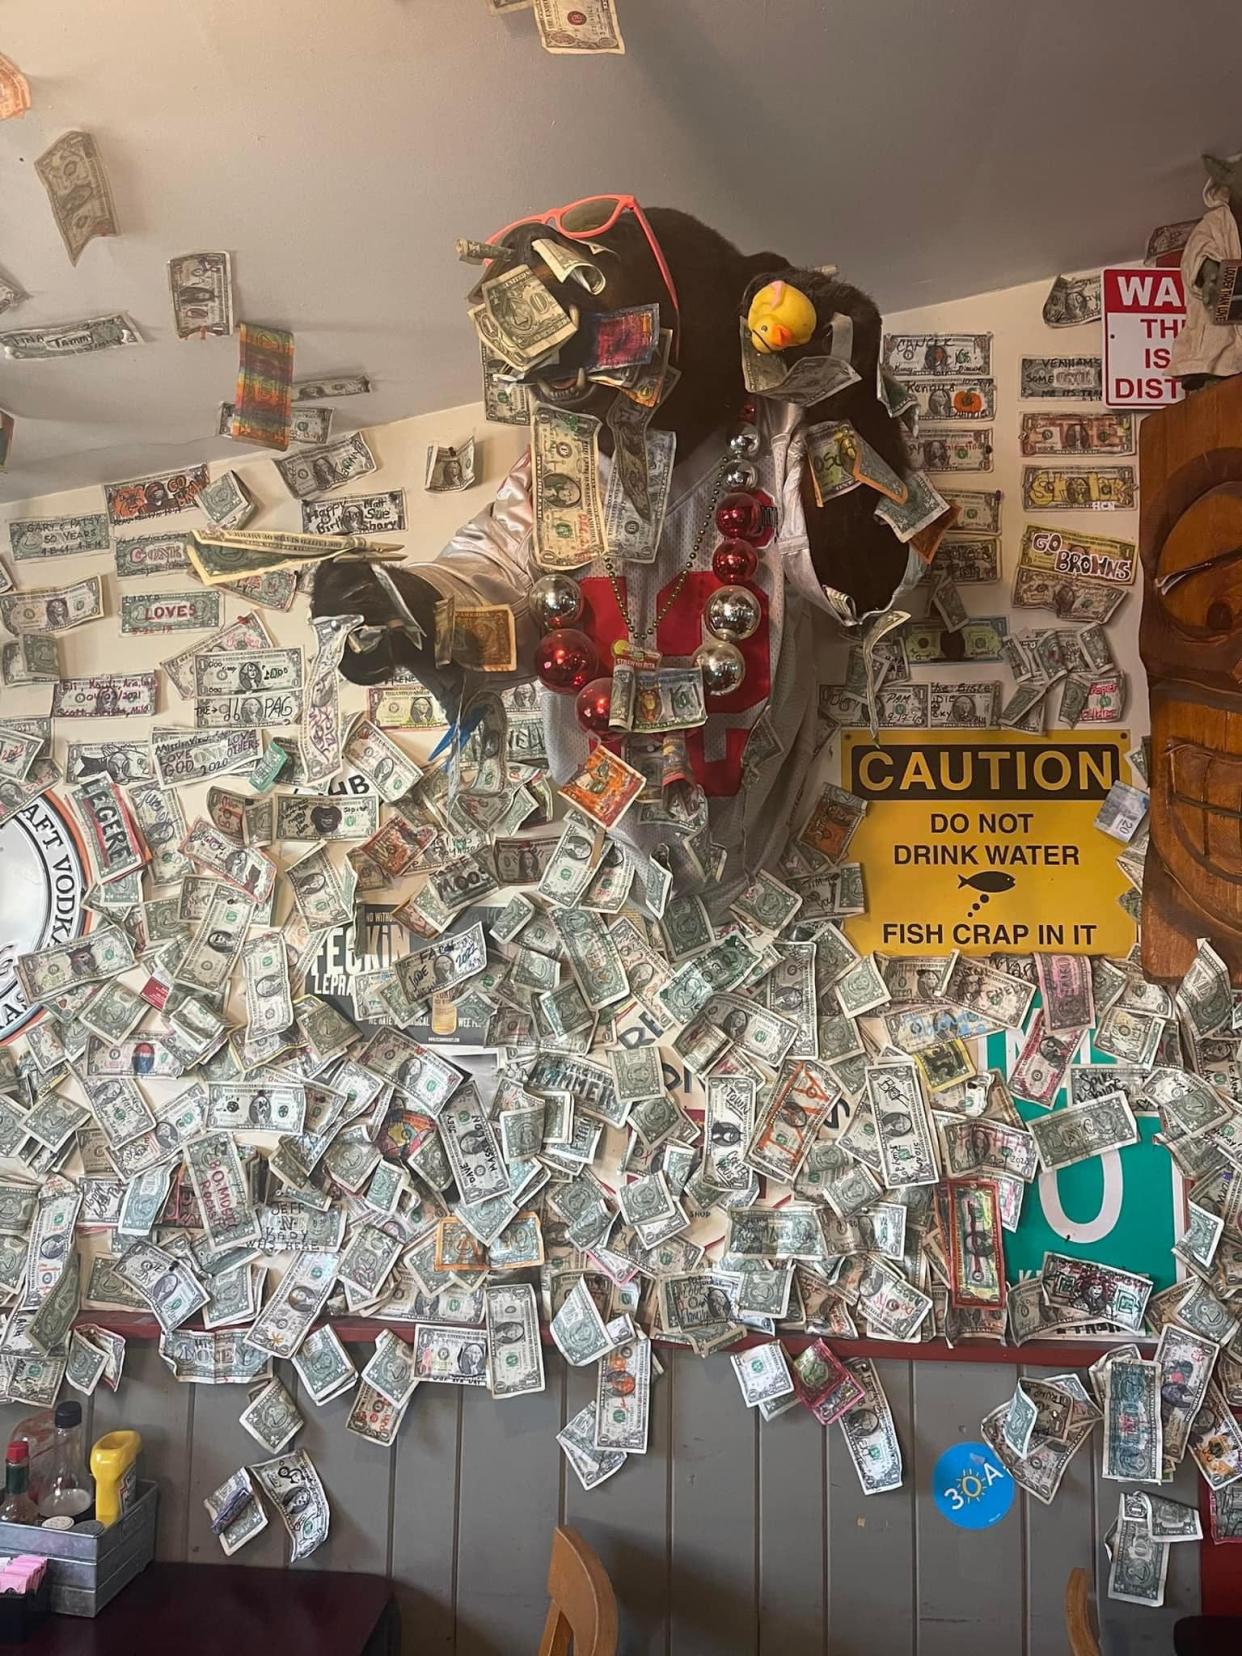 Eadies Fish House is looking for a way to clean the dollar bills accumulated on its walls over the years, so the bank will accept them.